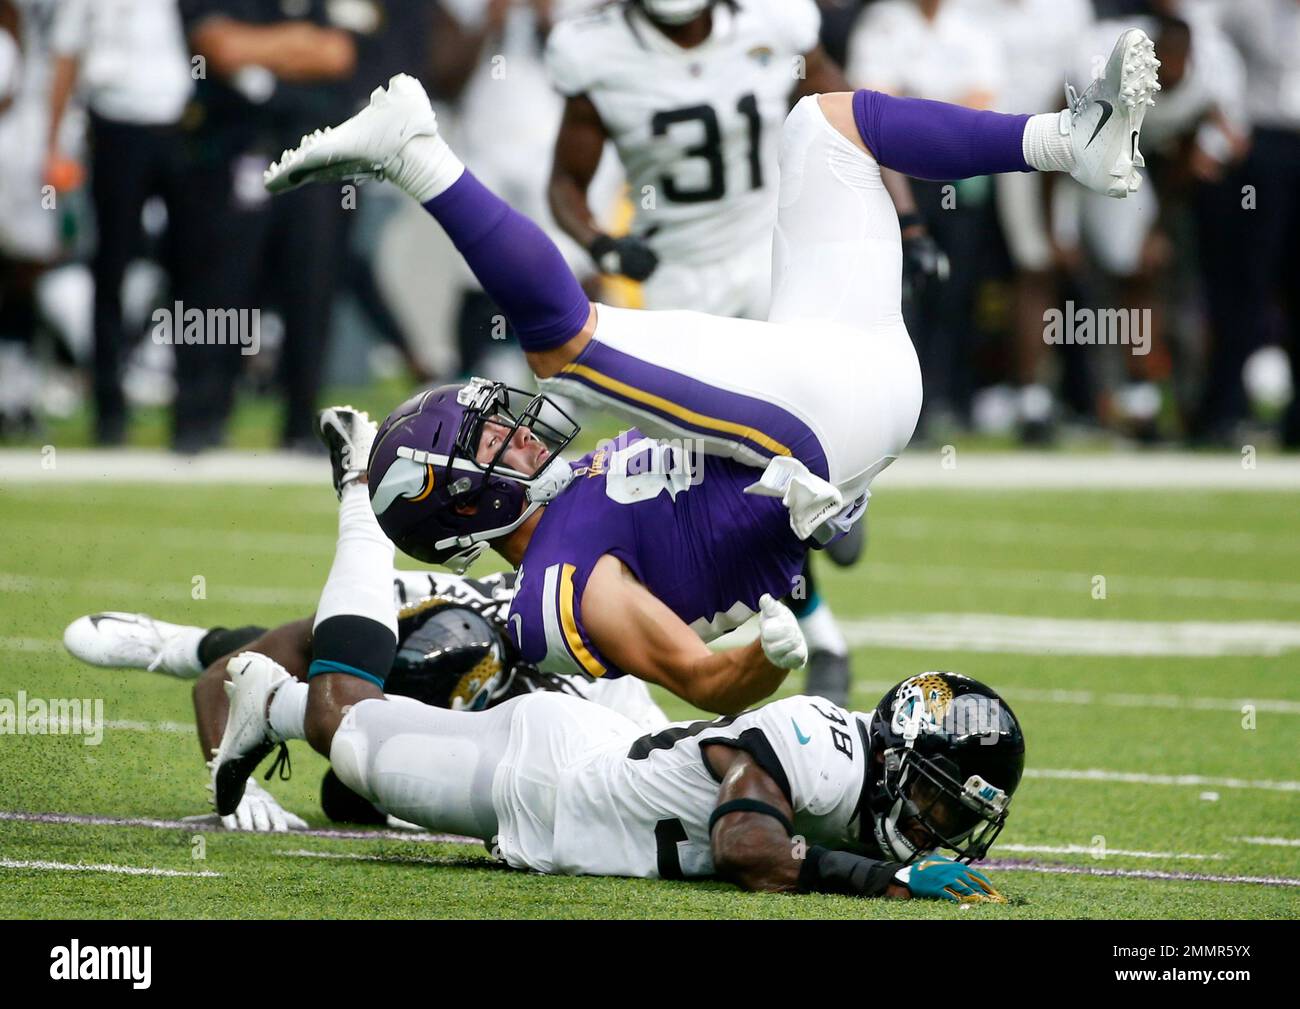 Minnesota Vikings wide receiver Chad Beebe (84) is tackled by Jacksonville  Jaguars defensive back C.J. Reavis (38) after making a reception during the  second half of an NFL preseason football game, Saturday,